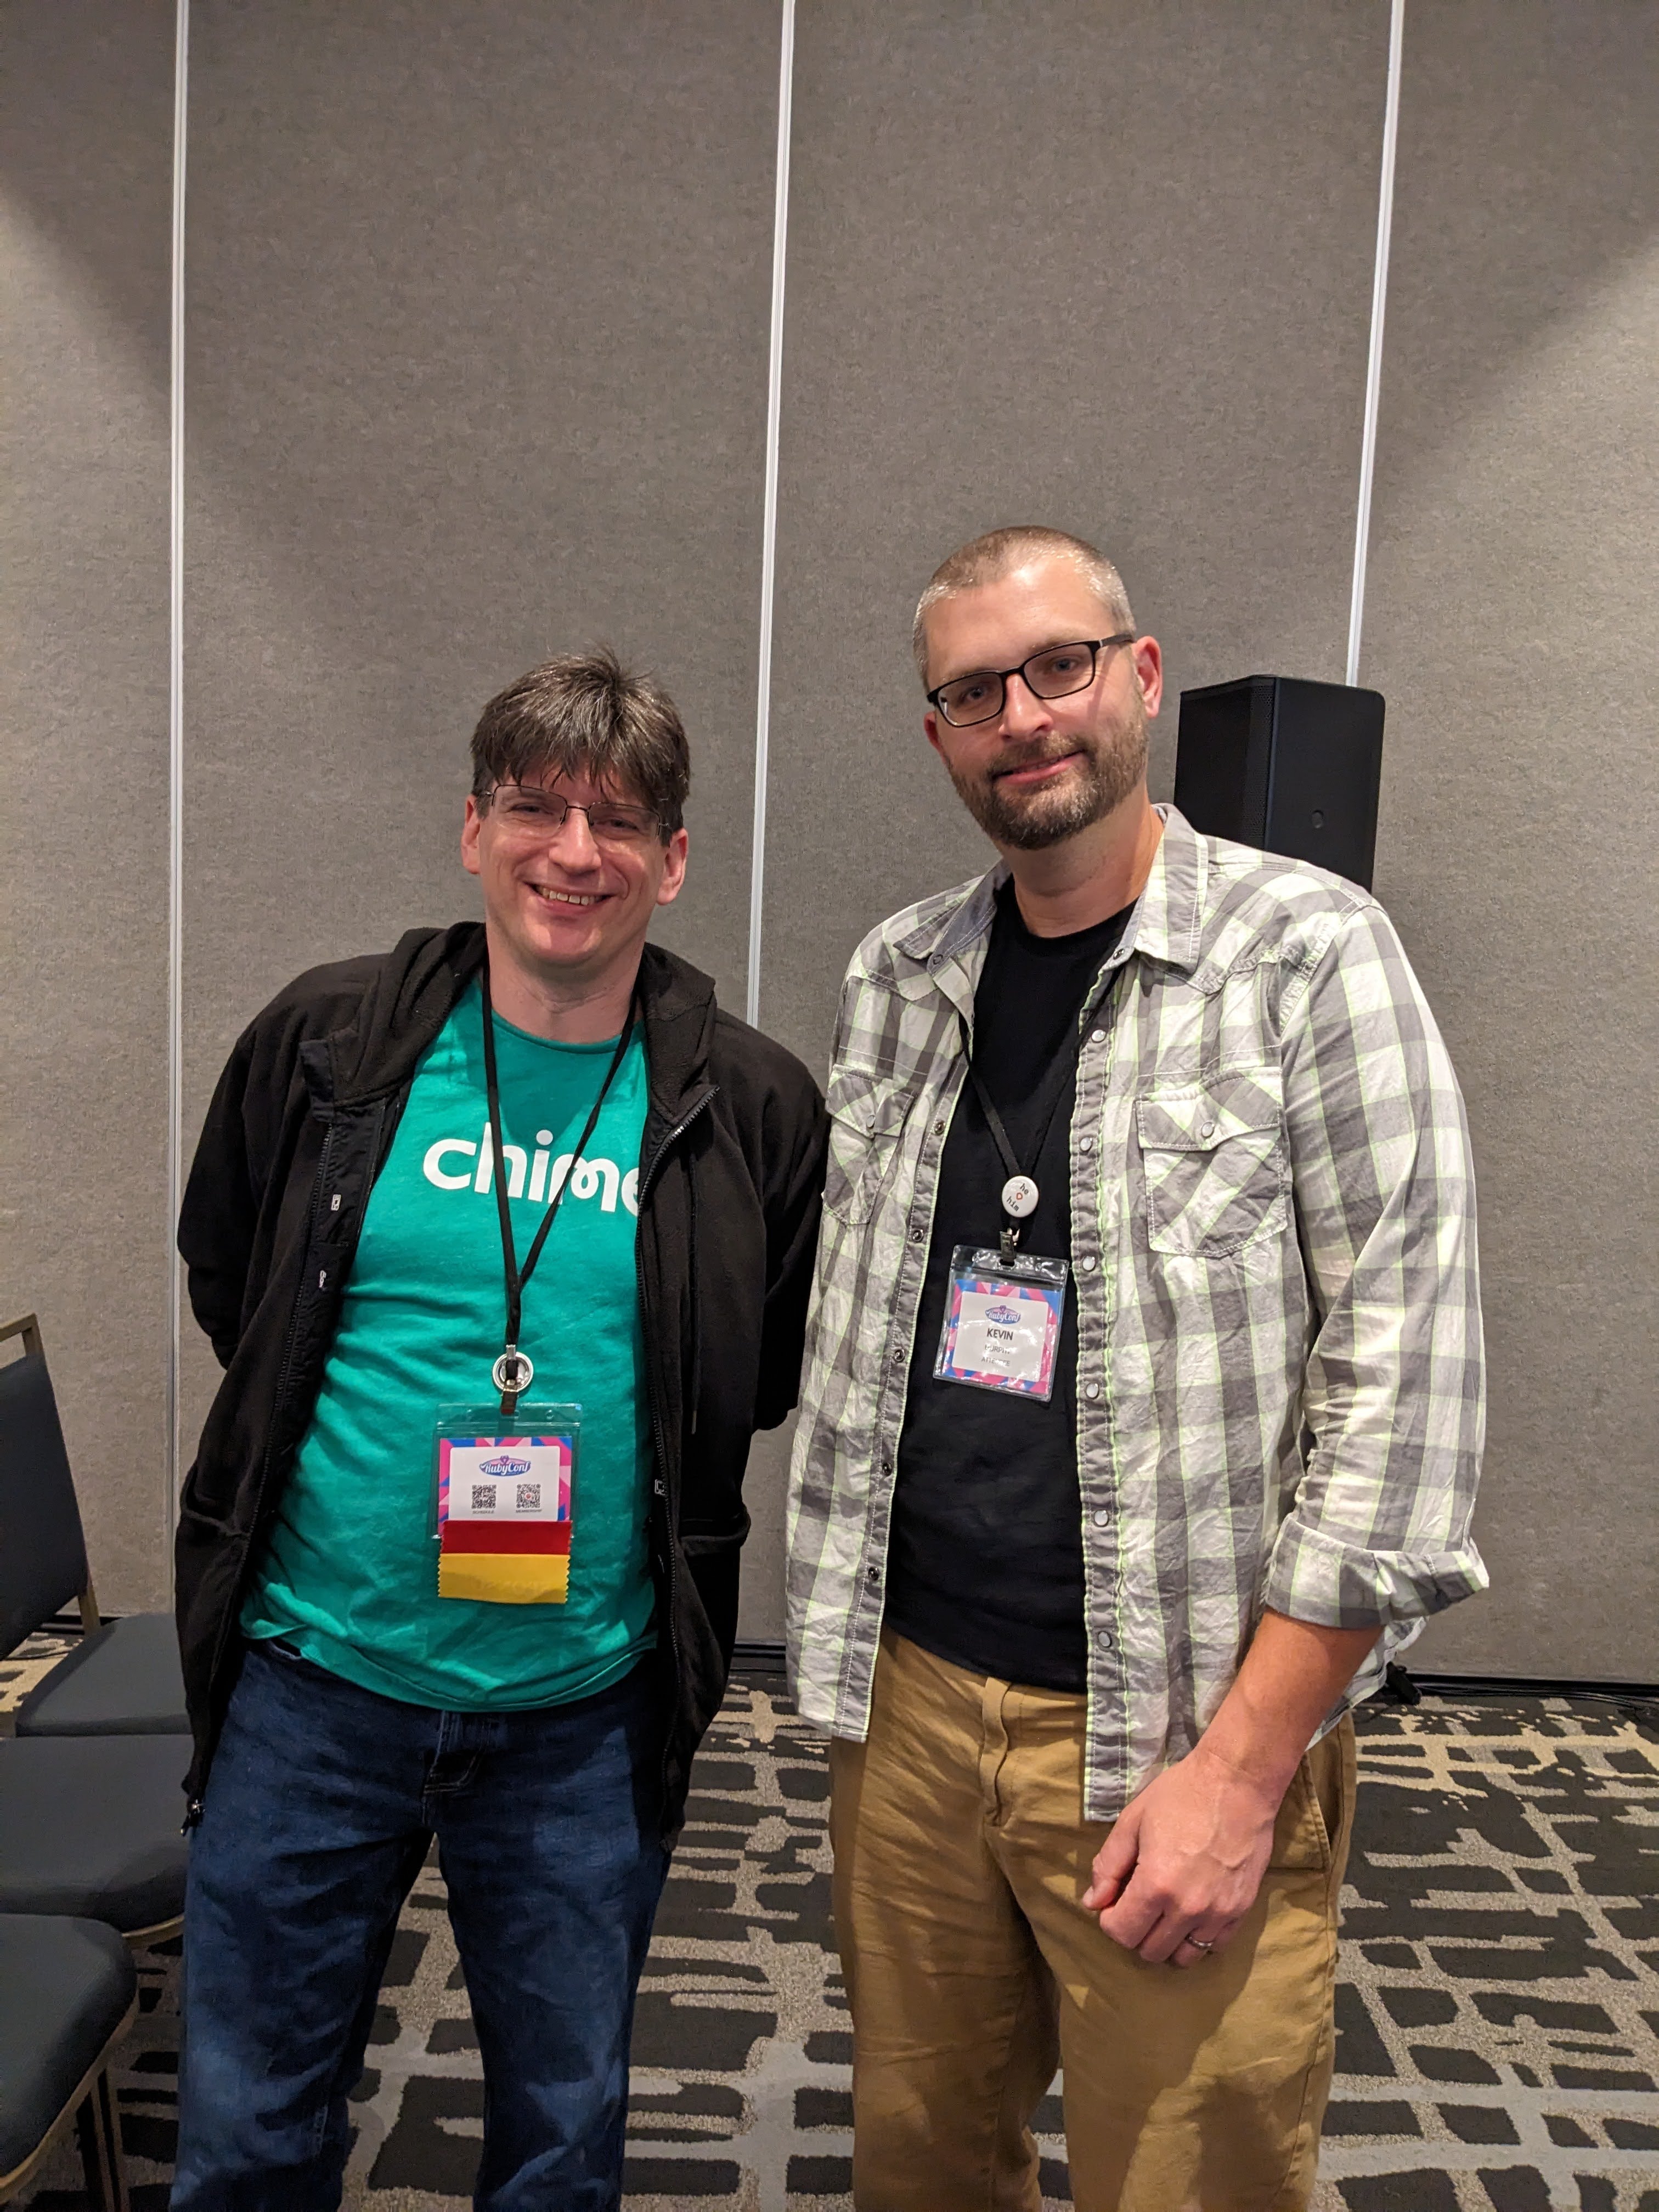 Noel Rappin and me at RubyConf 2023